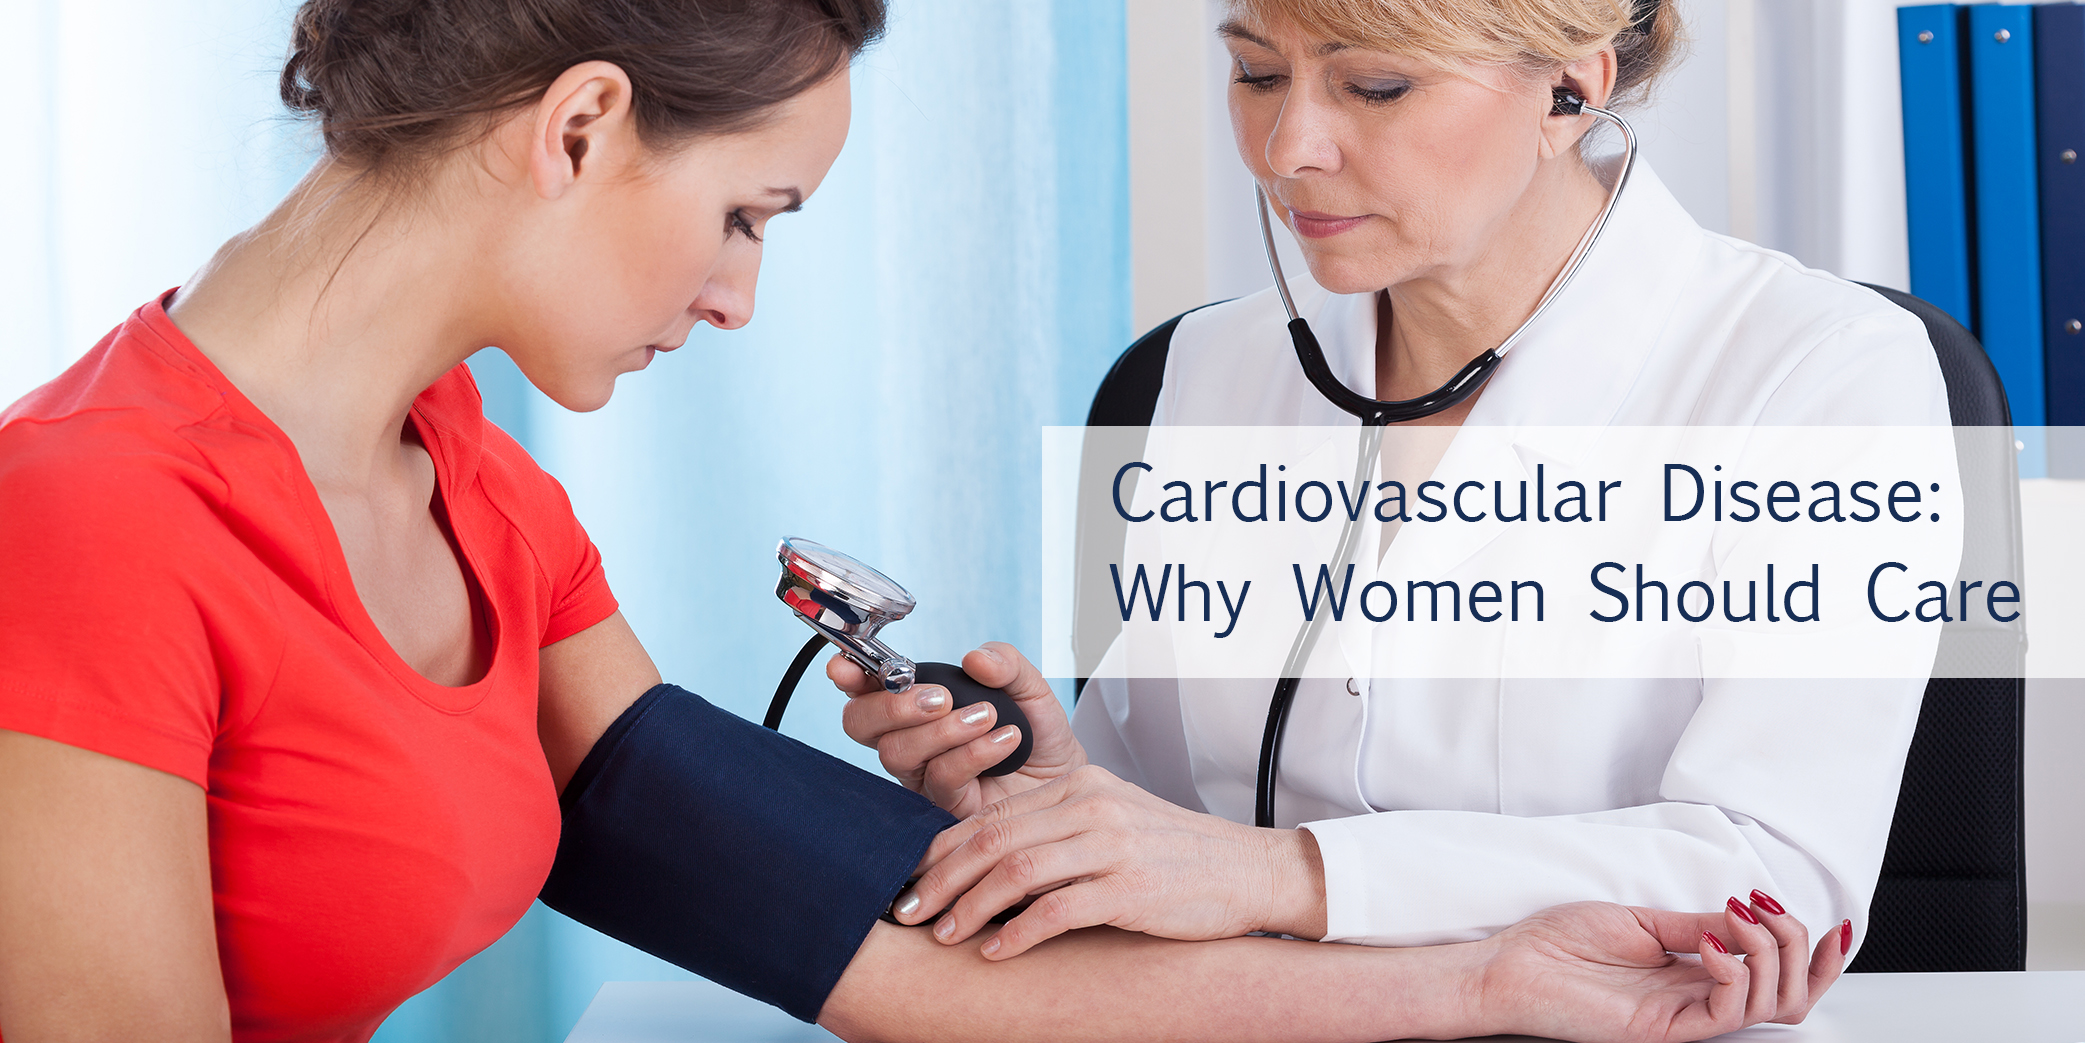 Cardiovascular Disease: Why Women Should Care